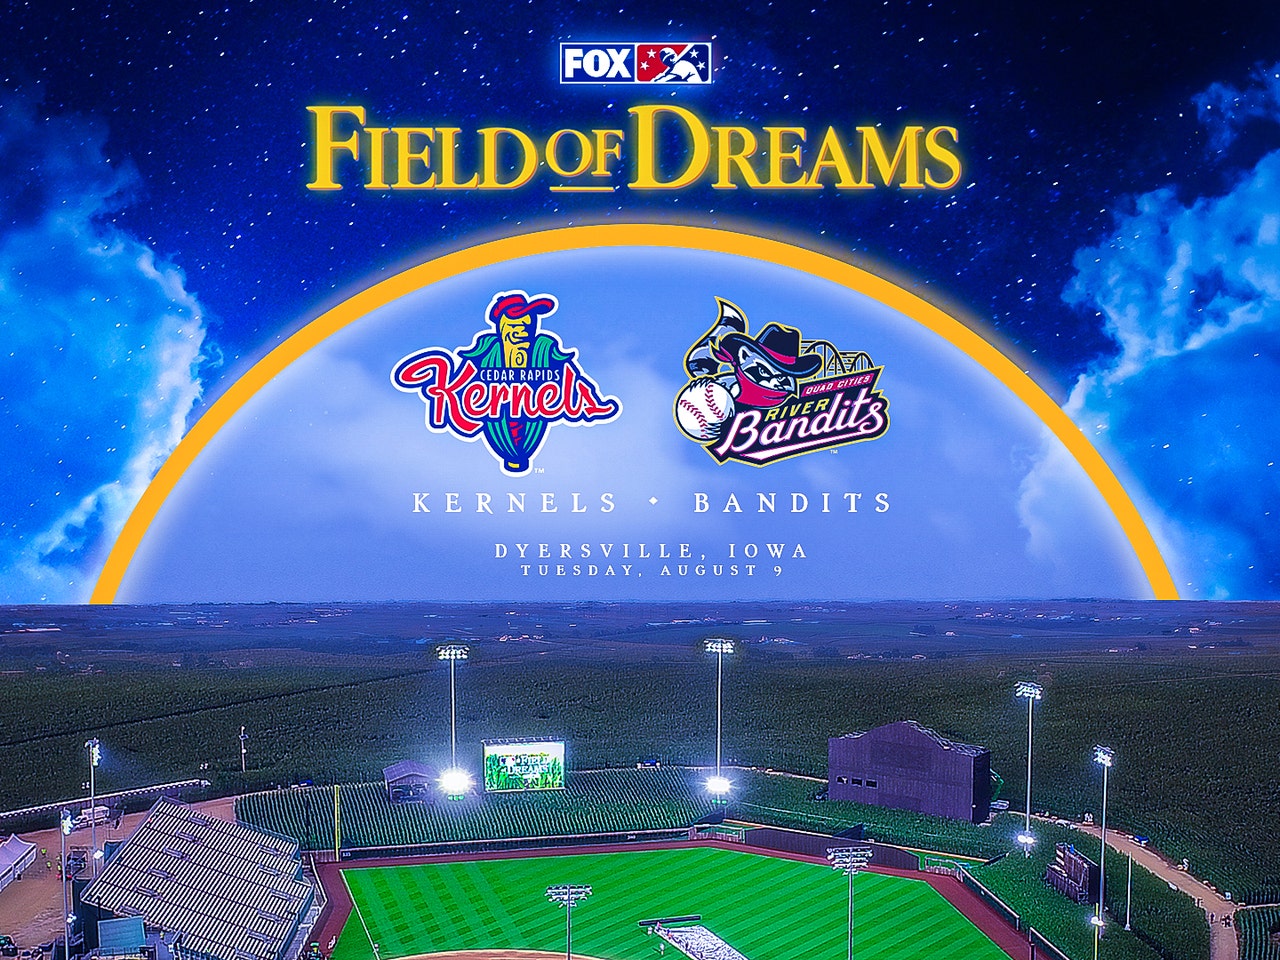 Field of Dreams Game 2022: Minor-leaguers get their night on big stage